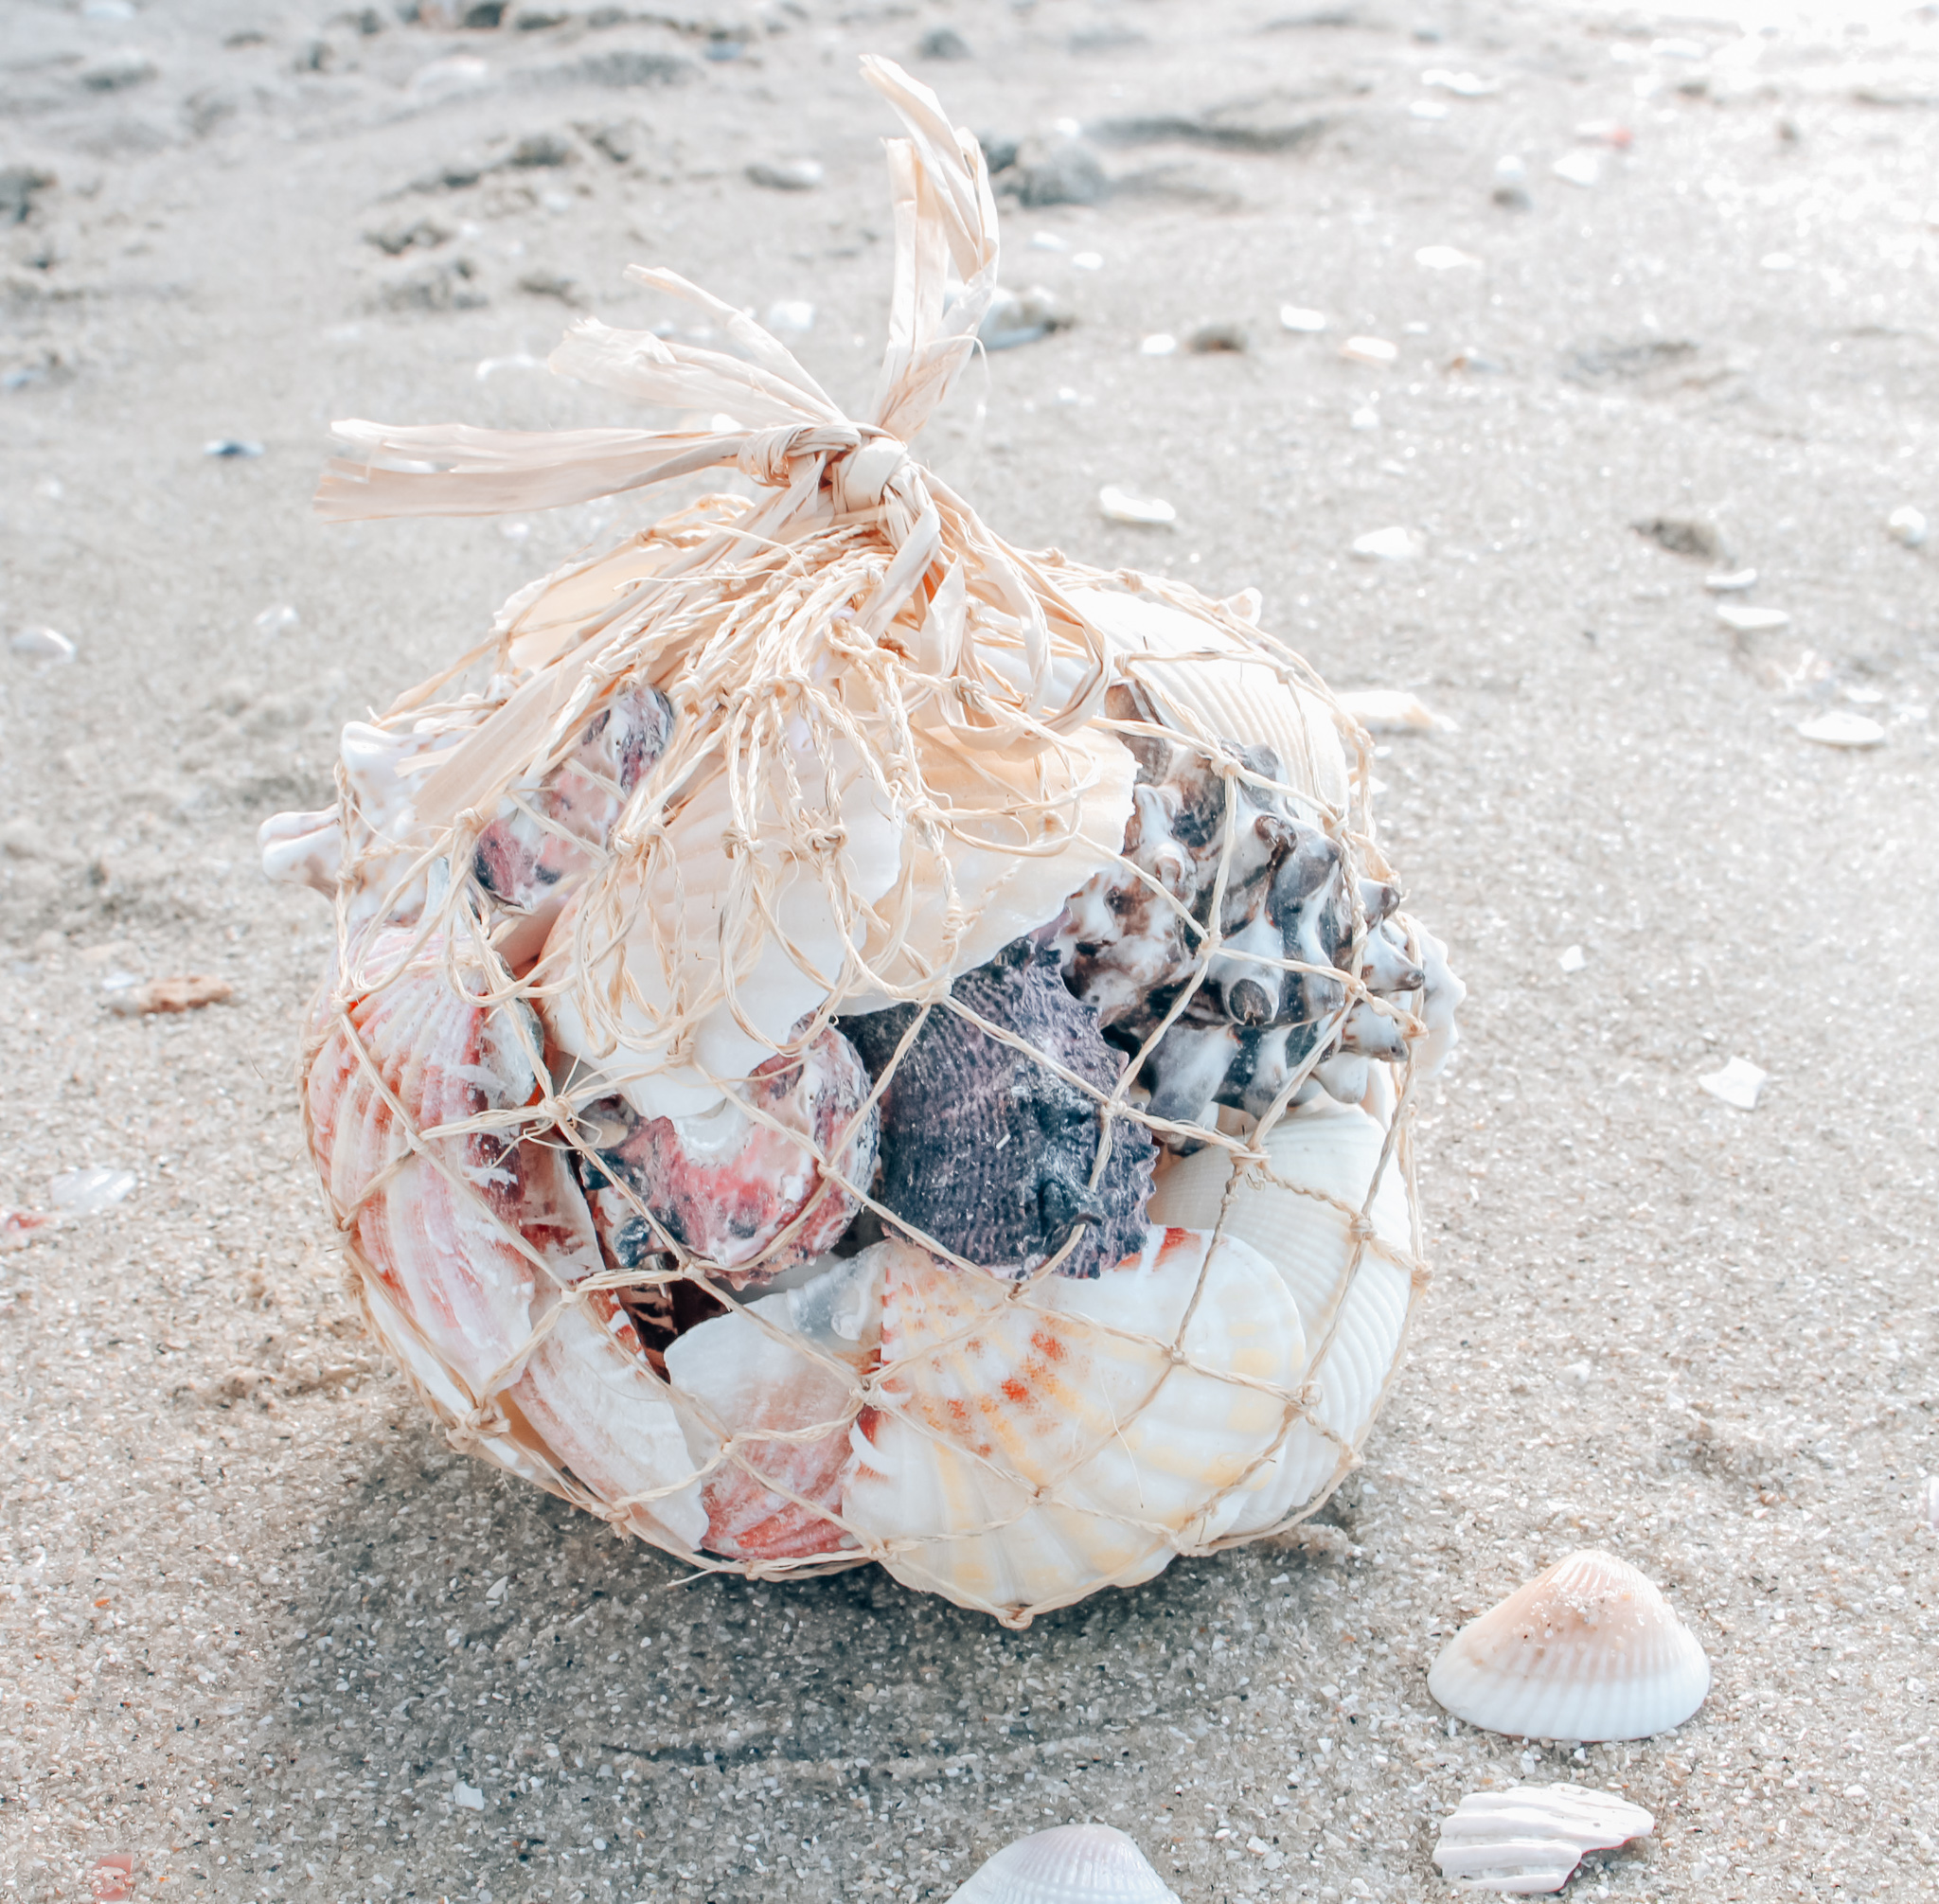 Details more than 76 bag of seashells - in.cdgdbentre